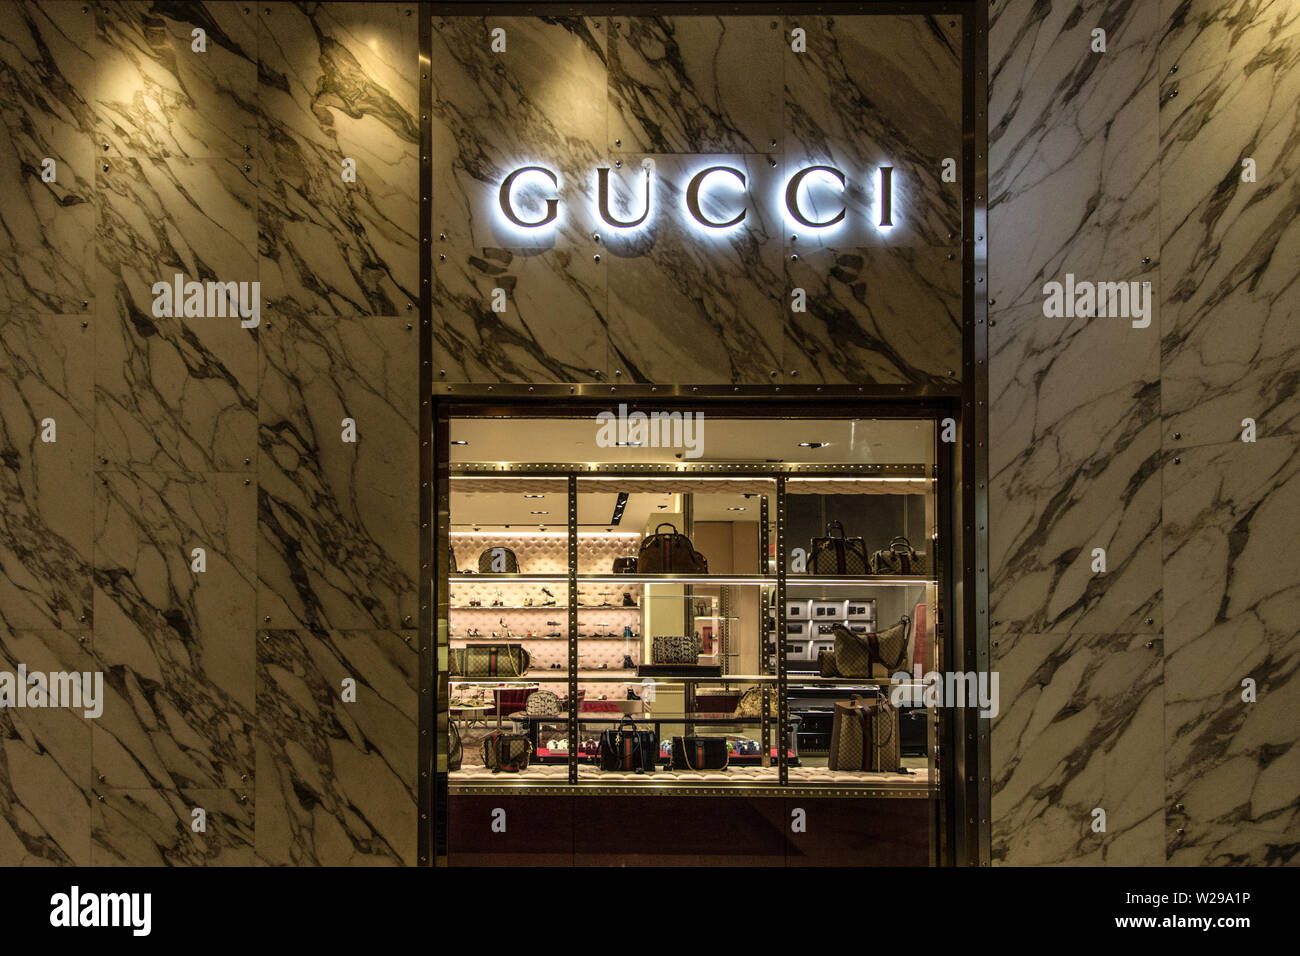 Las Vegas, Nevada, USA - May 6, 2019: Storefront of the Gucci store at the Bellagio resort in Las Vegas, Nevada. Stock Photo